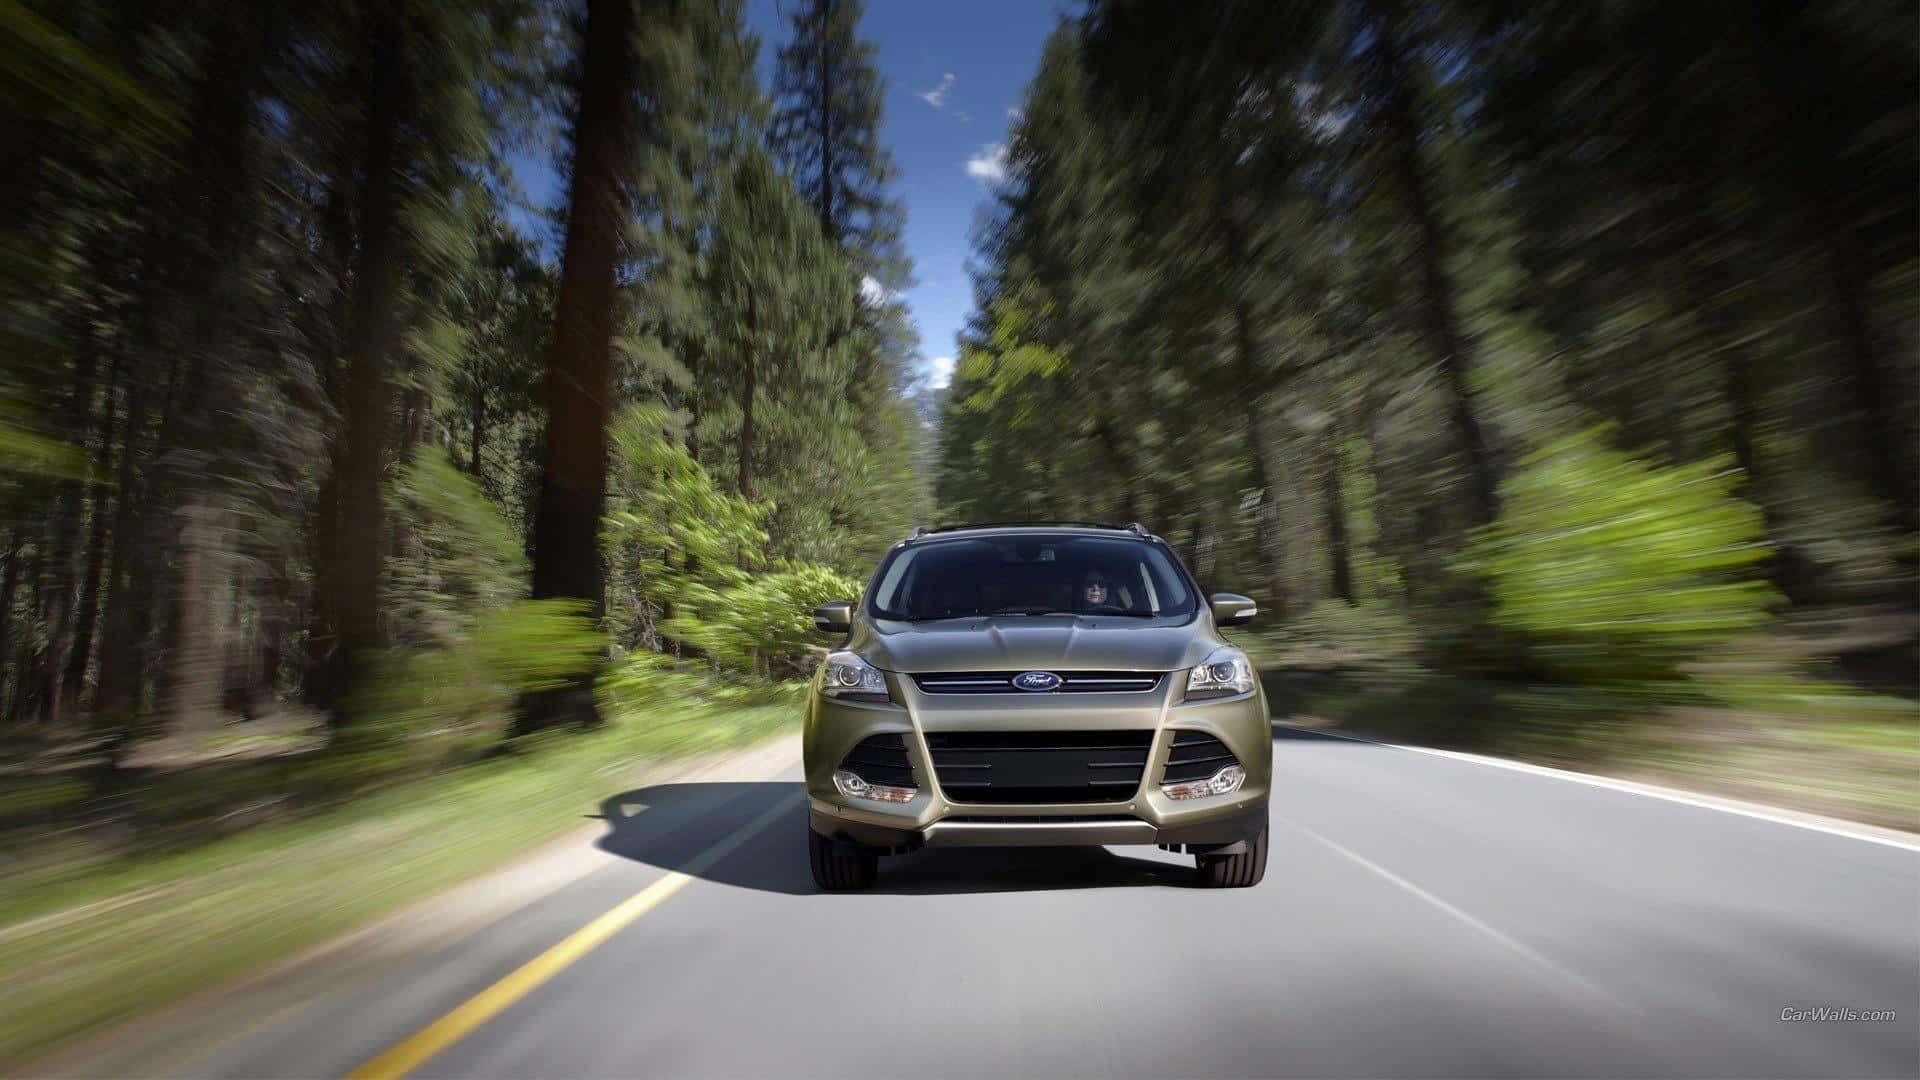 Sleek Ford Escape SUV in Nature Setting Wallpaper